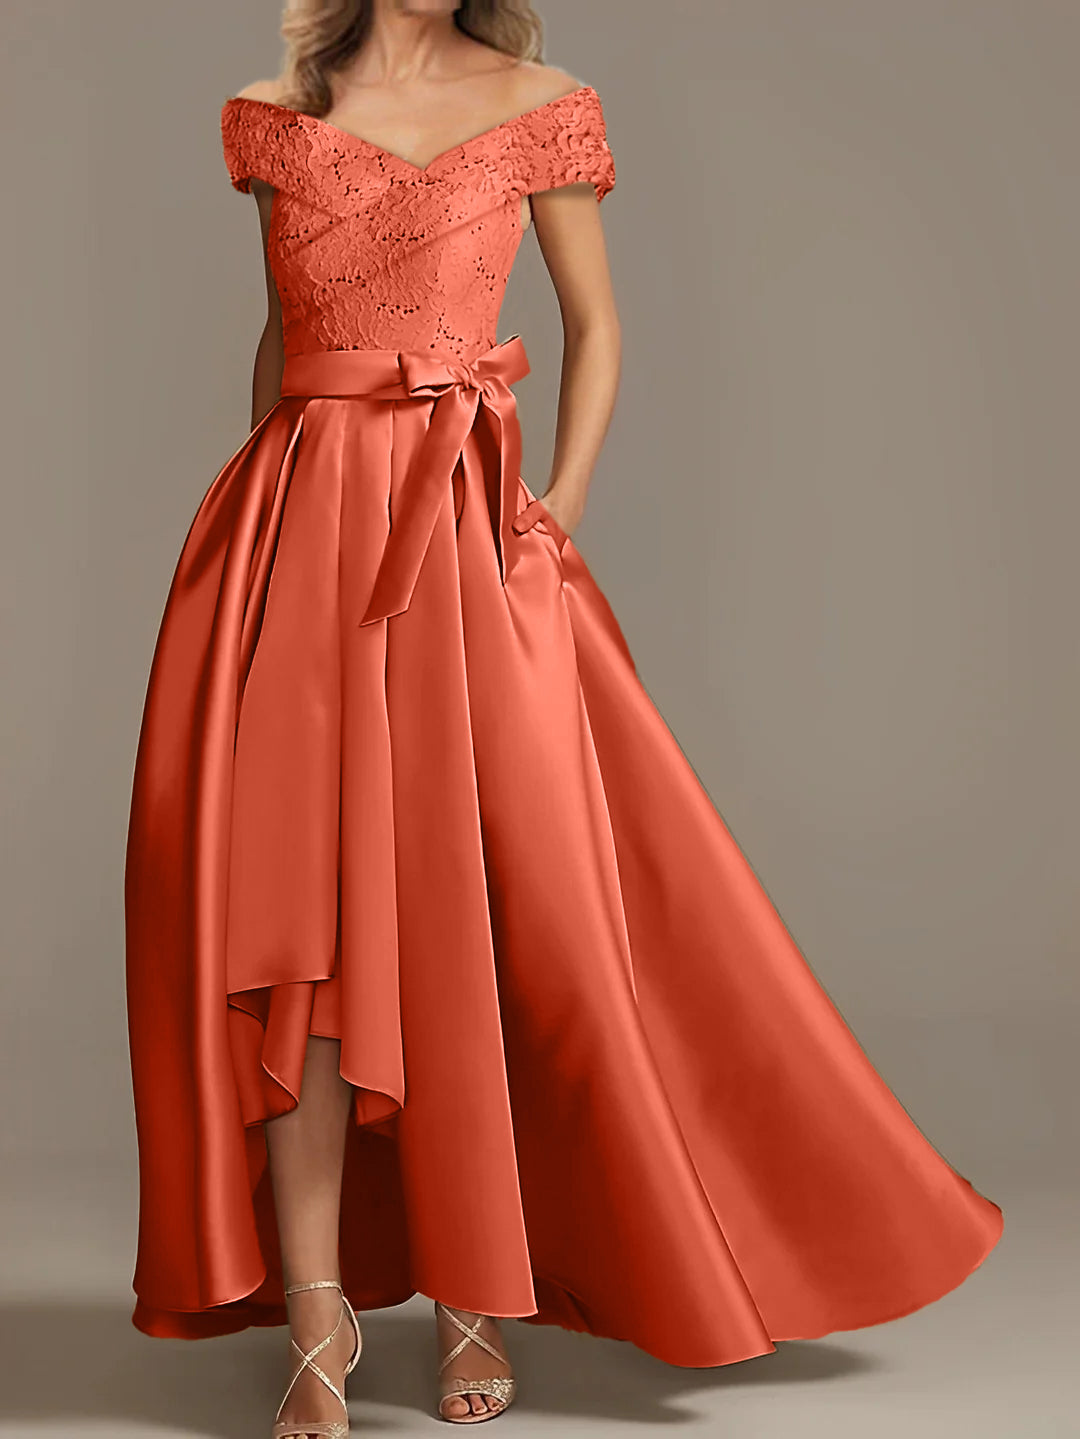 A-Line/Princess Off-the-Shoulder Asymmetrical Mother of the Bride Dresses with Ruffles